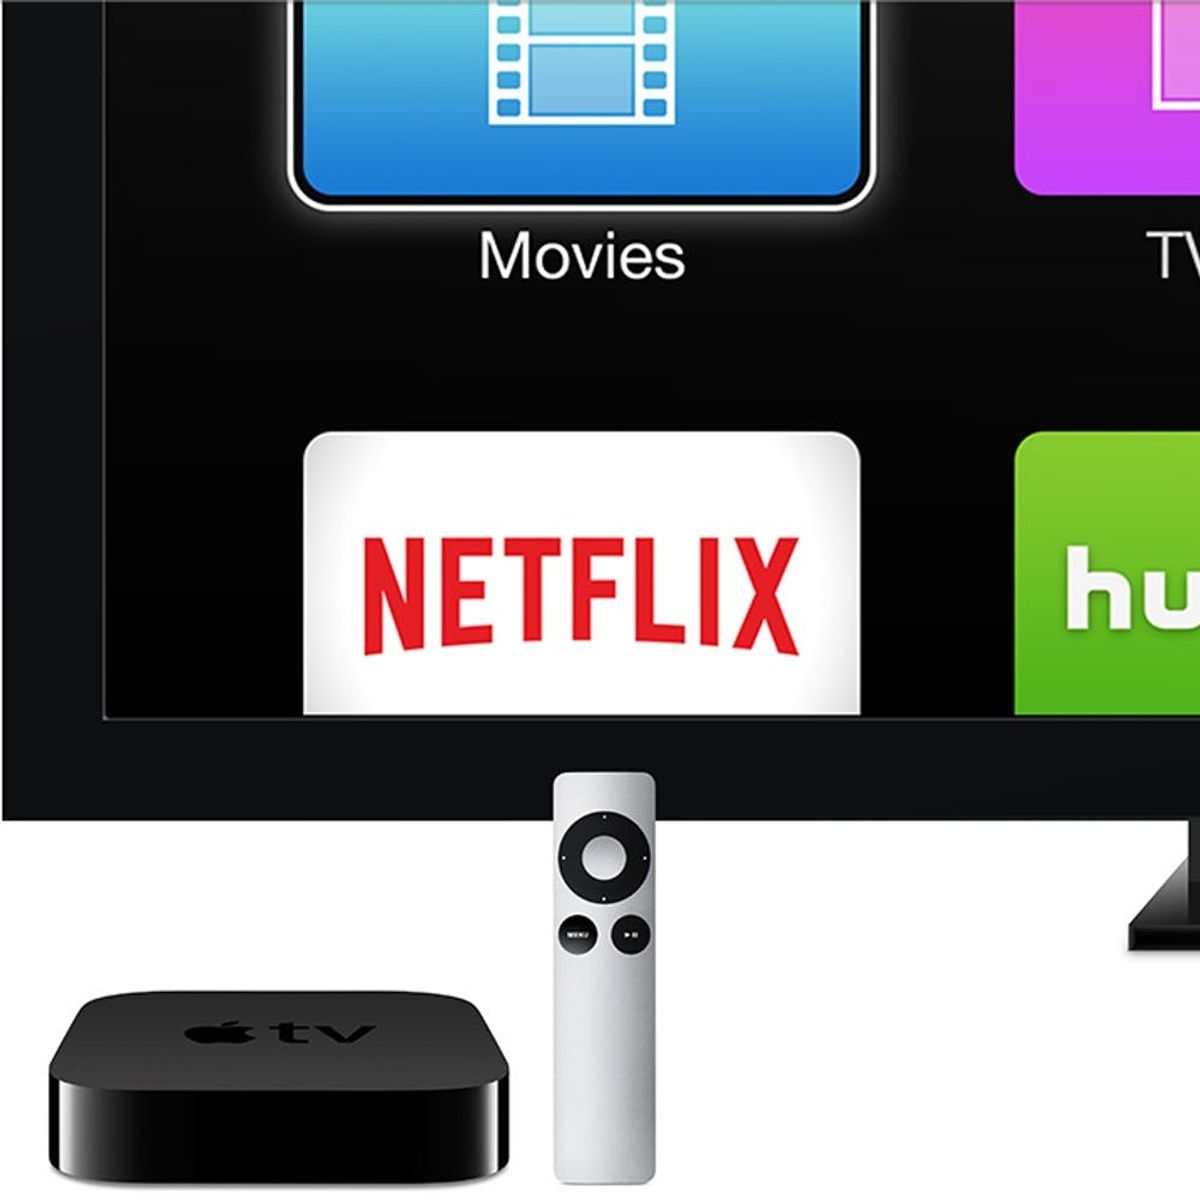 Apple Rumor Alert! How Apple Wants to Take Over Your TV